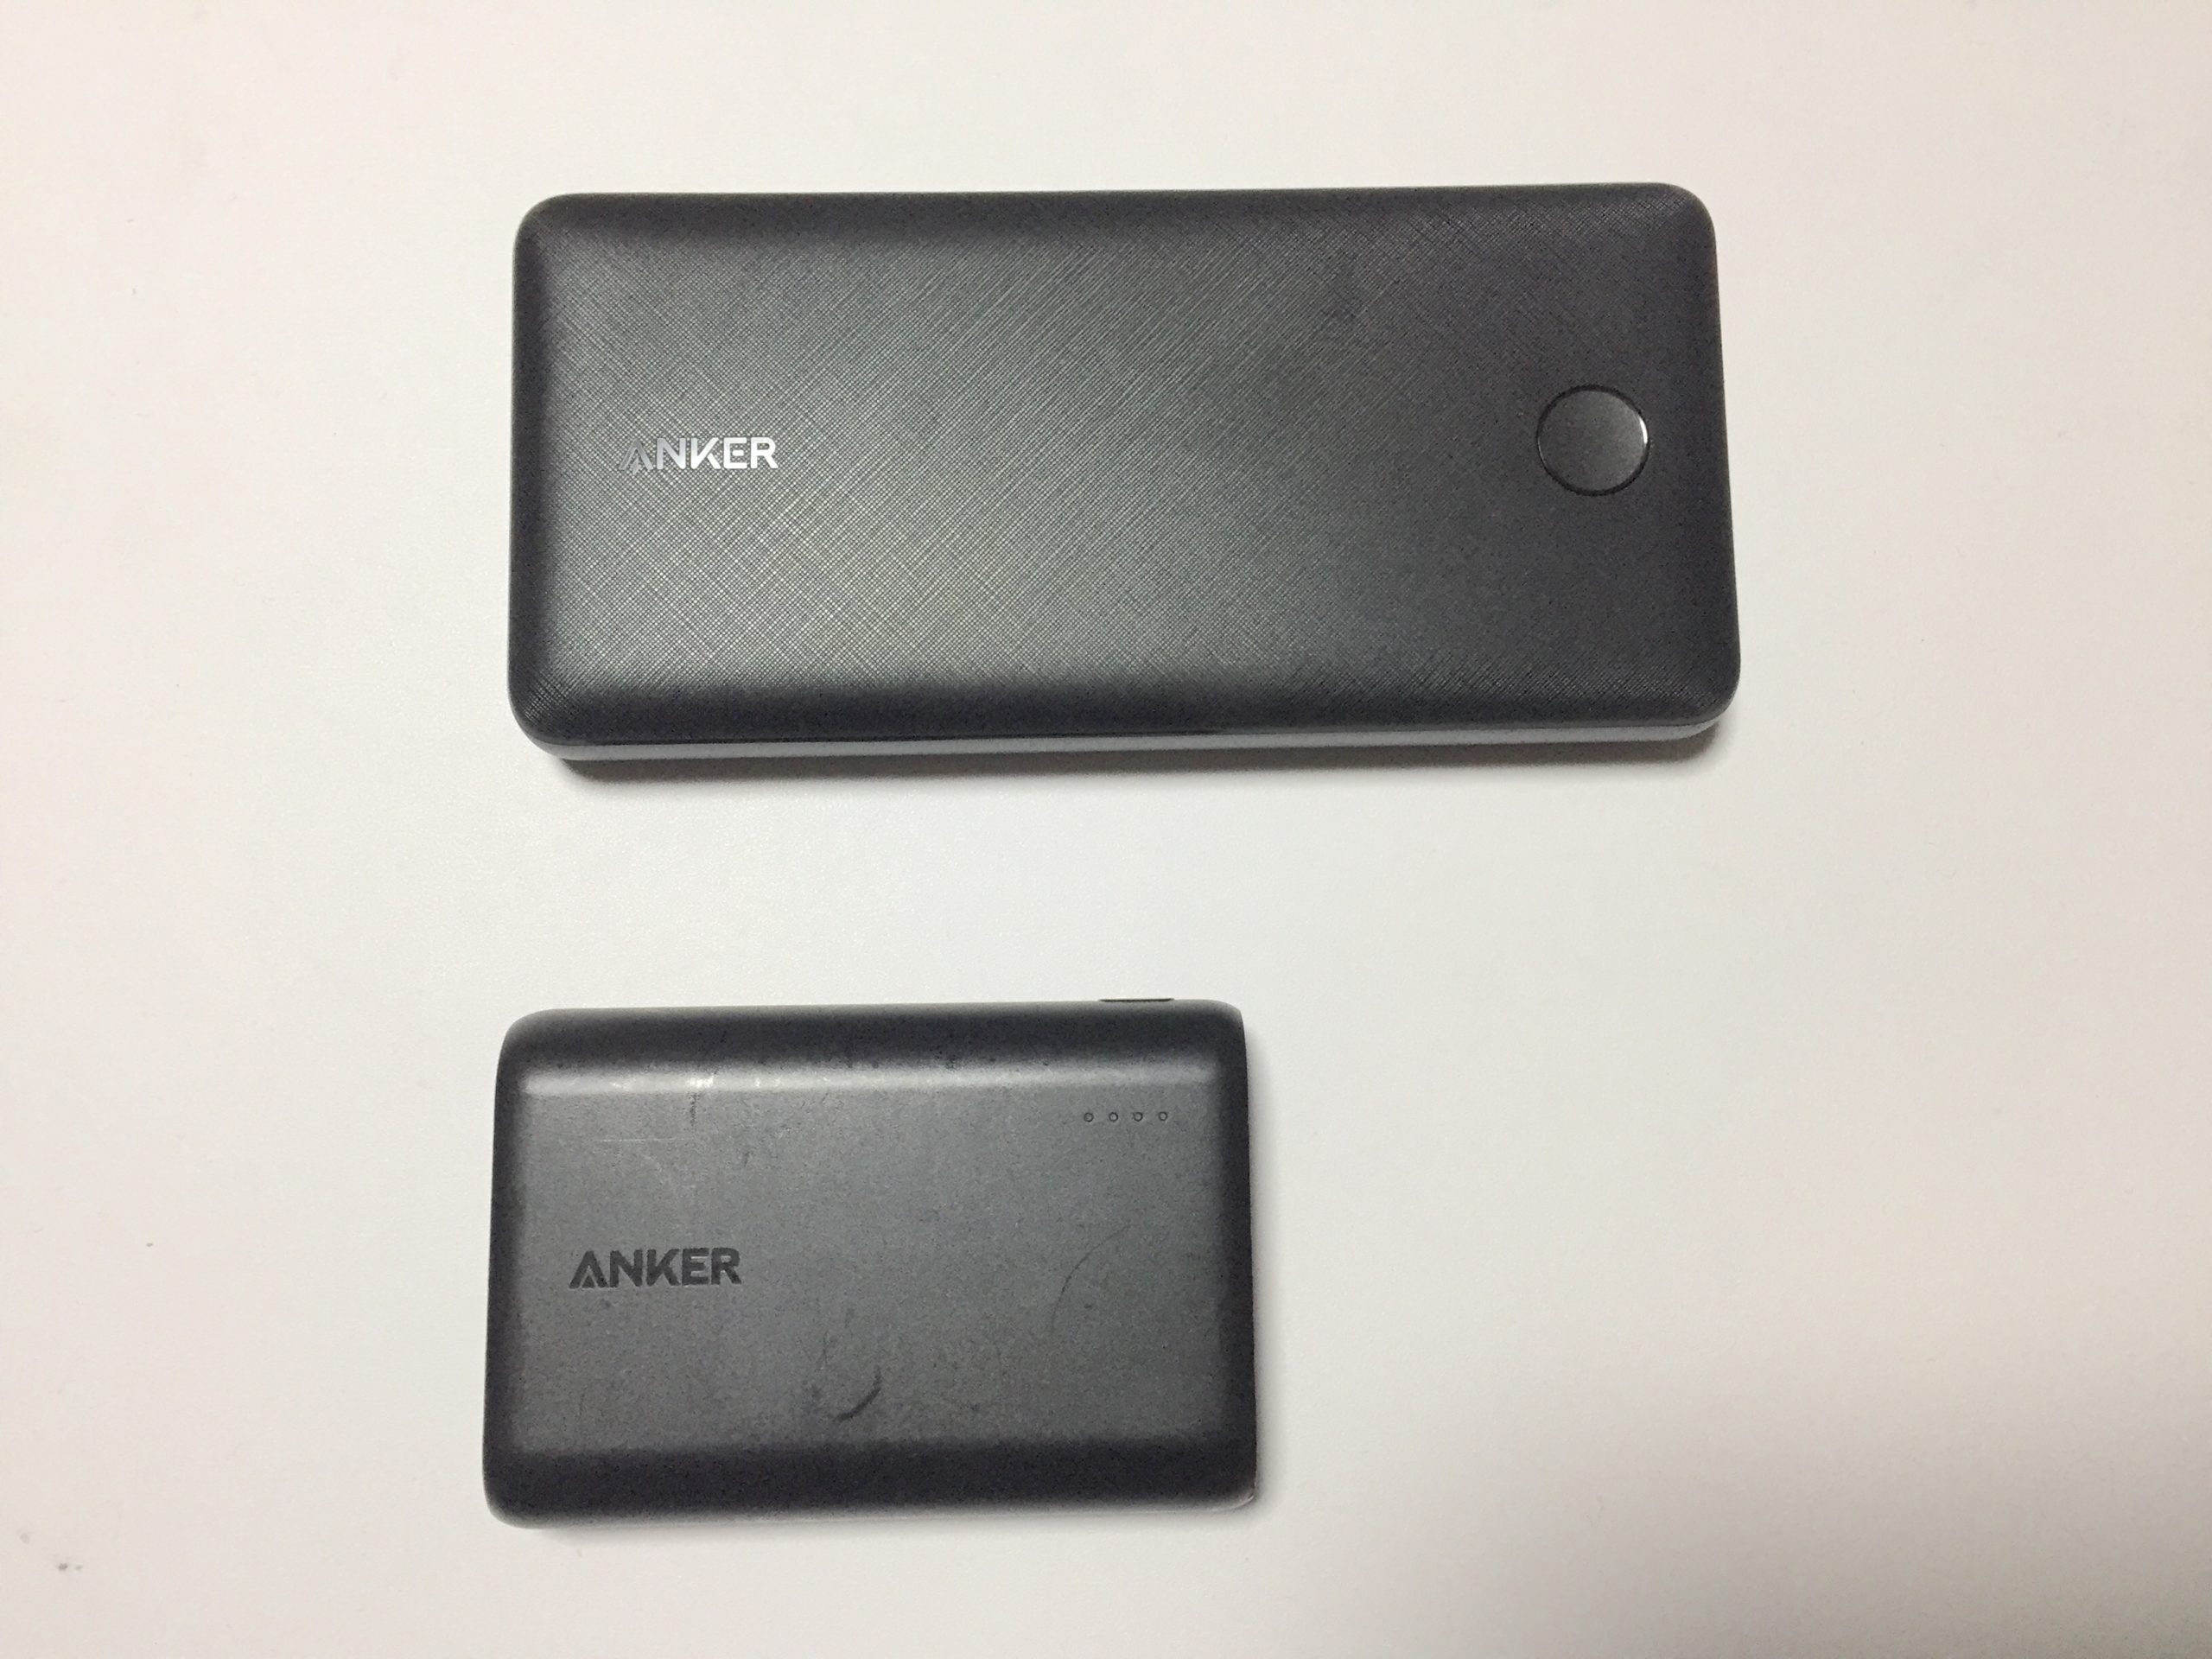 Ankerのモバイルバッテリー PowerCore Essential 20000